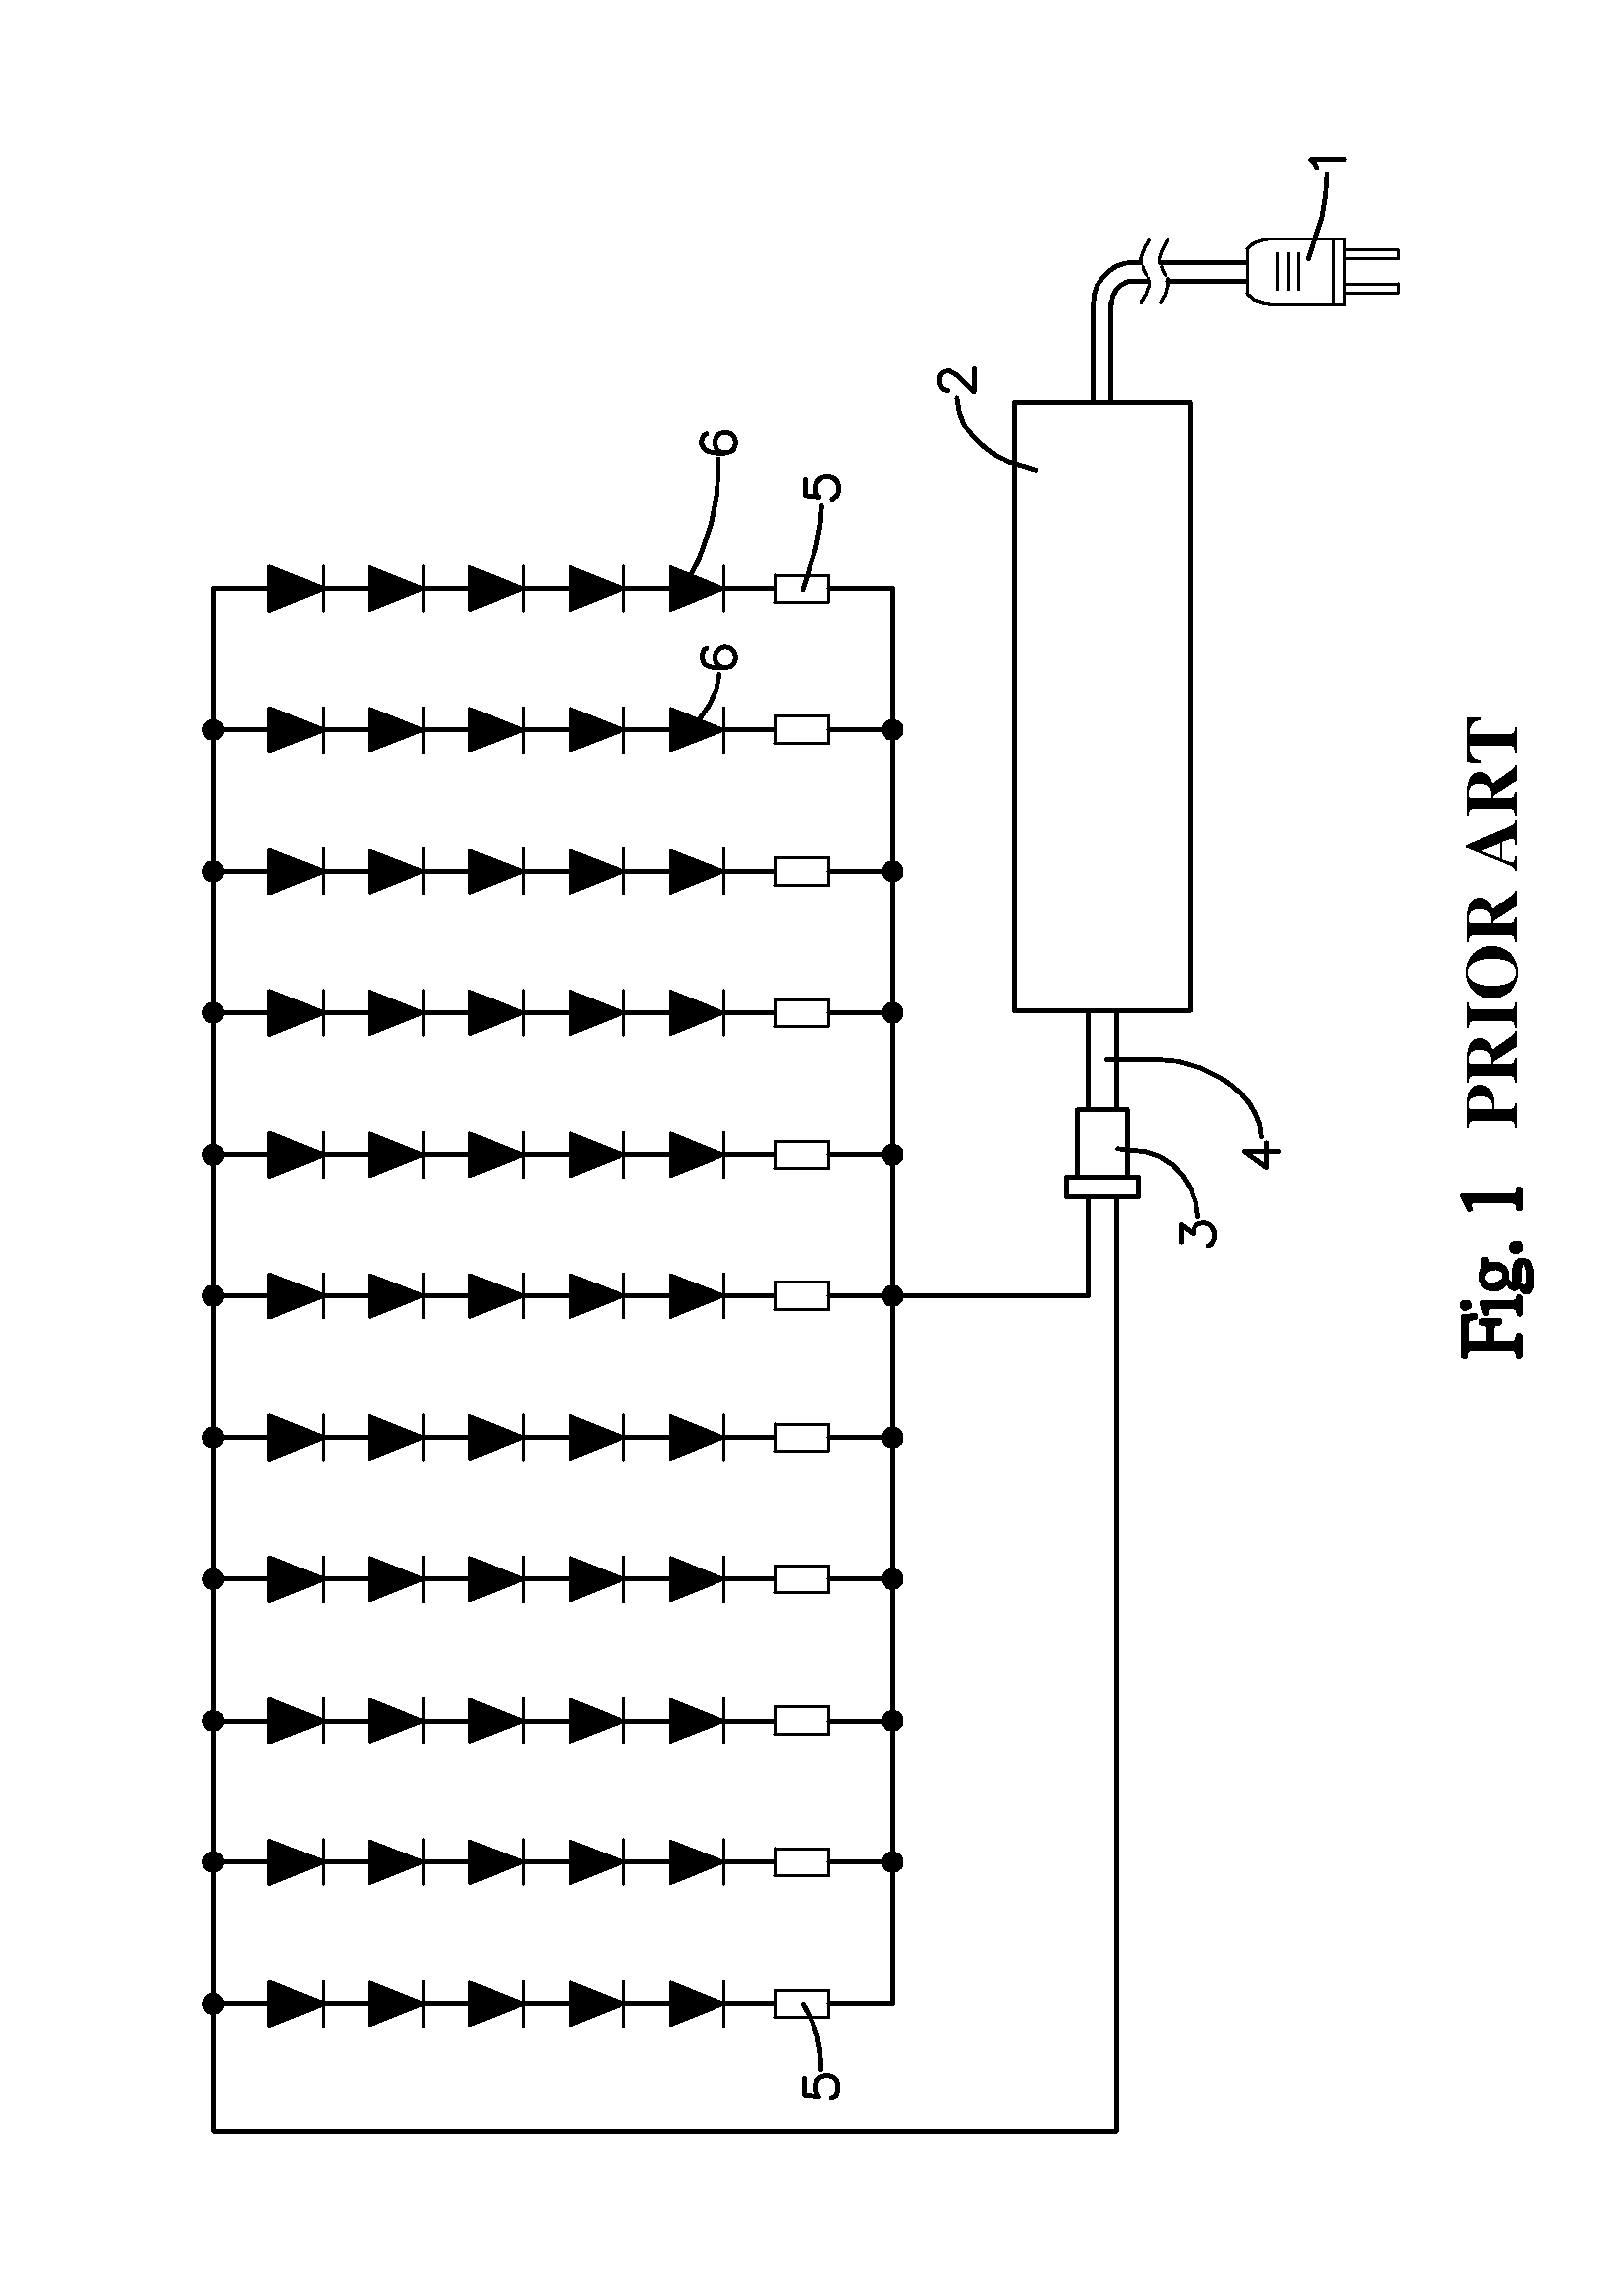 Circuit structure of light-emitting diode (LED) lamp